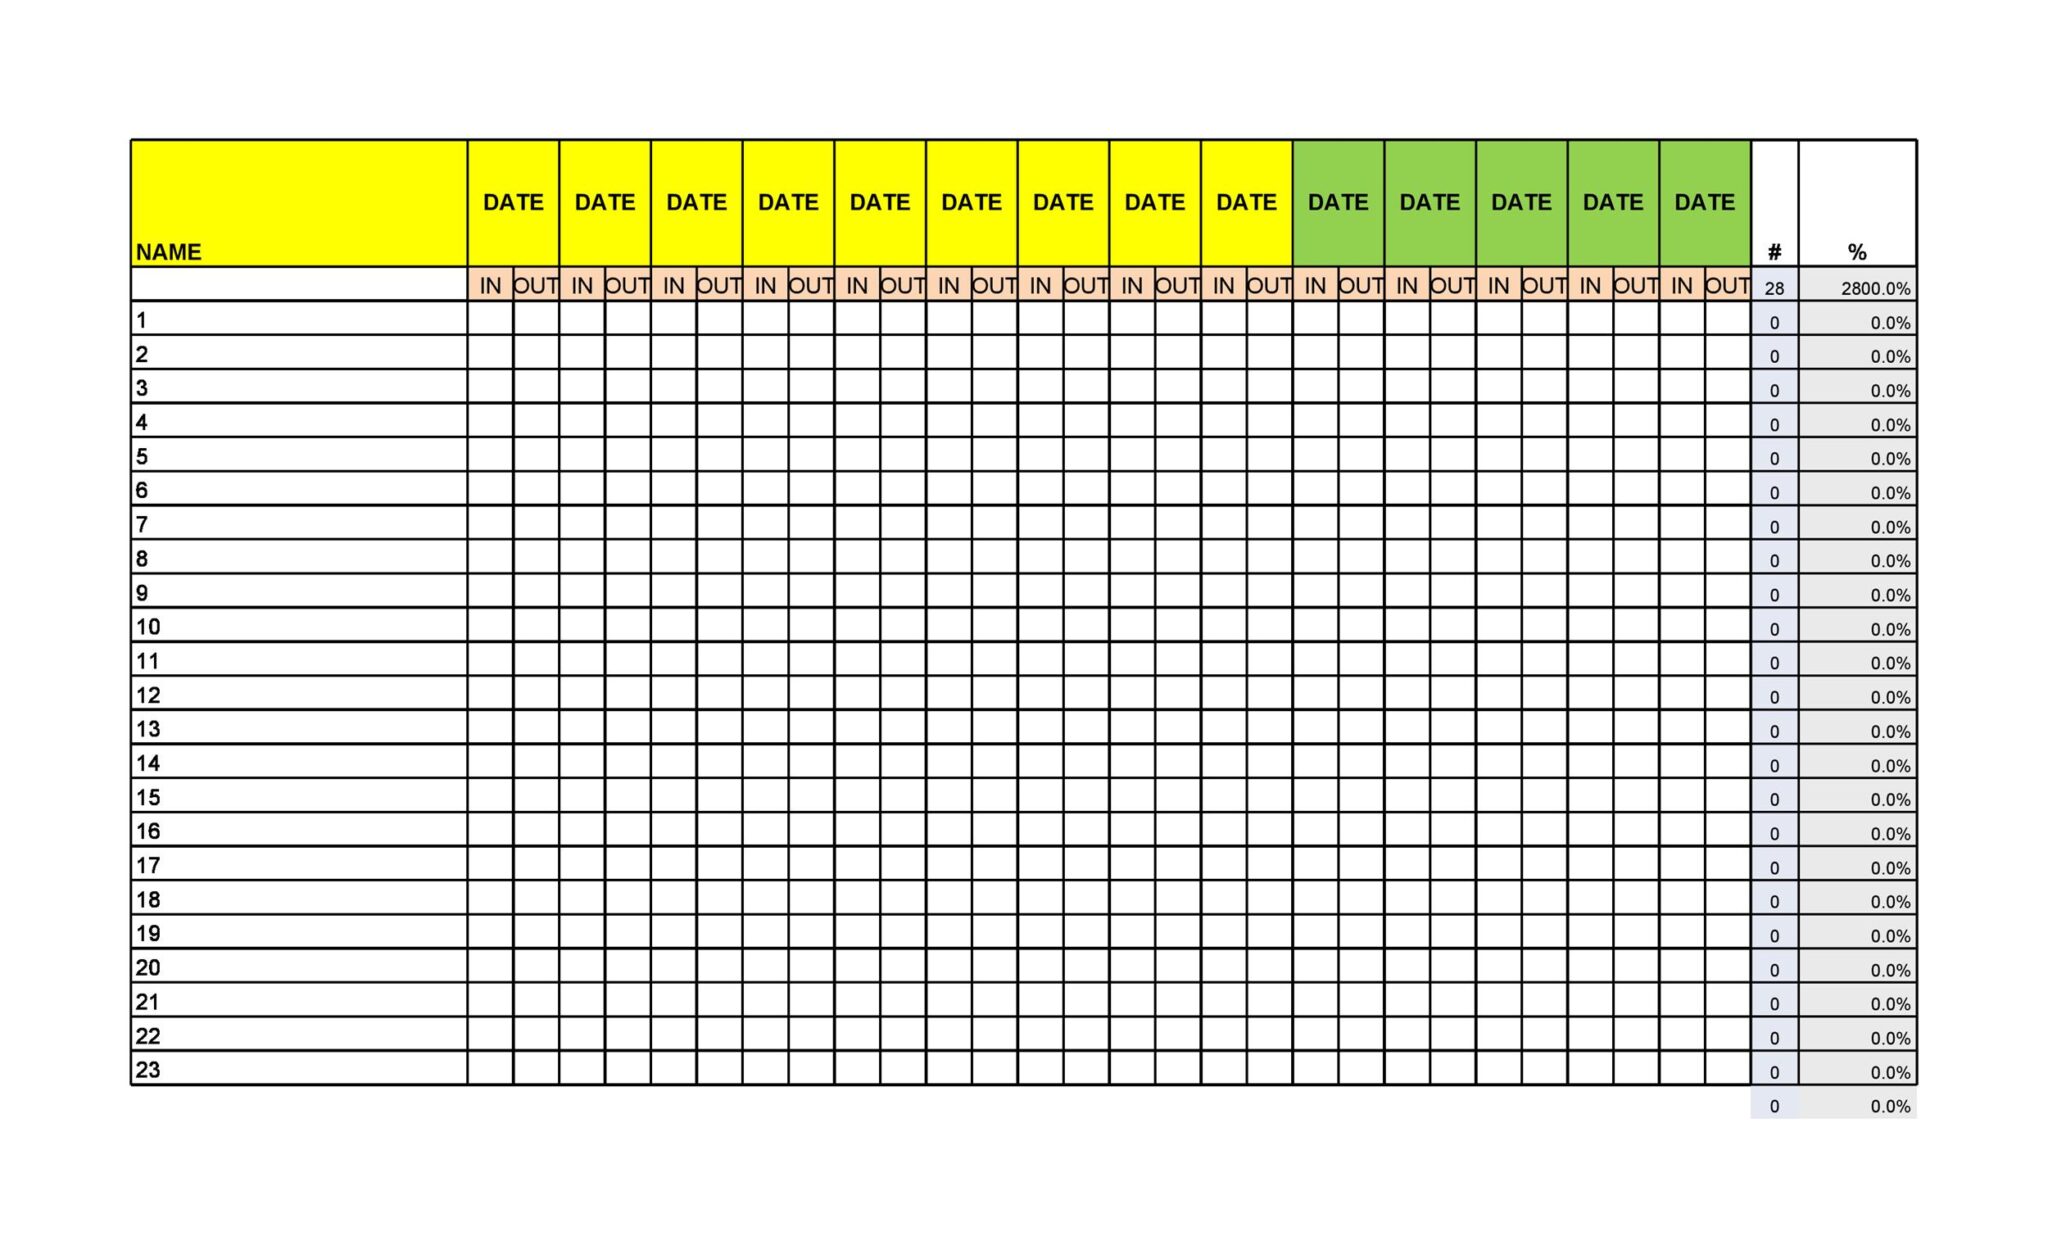 Employee Attendance Record Template Excel